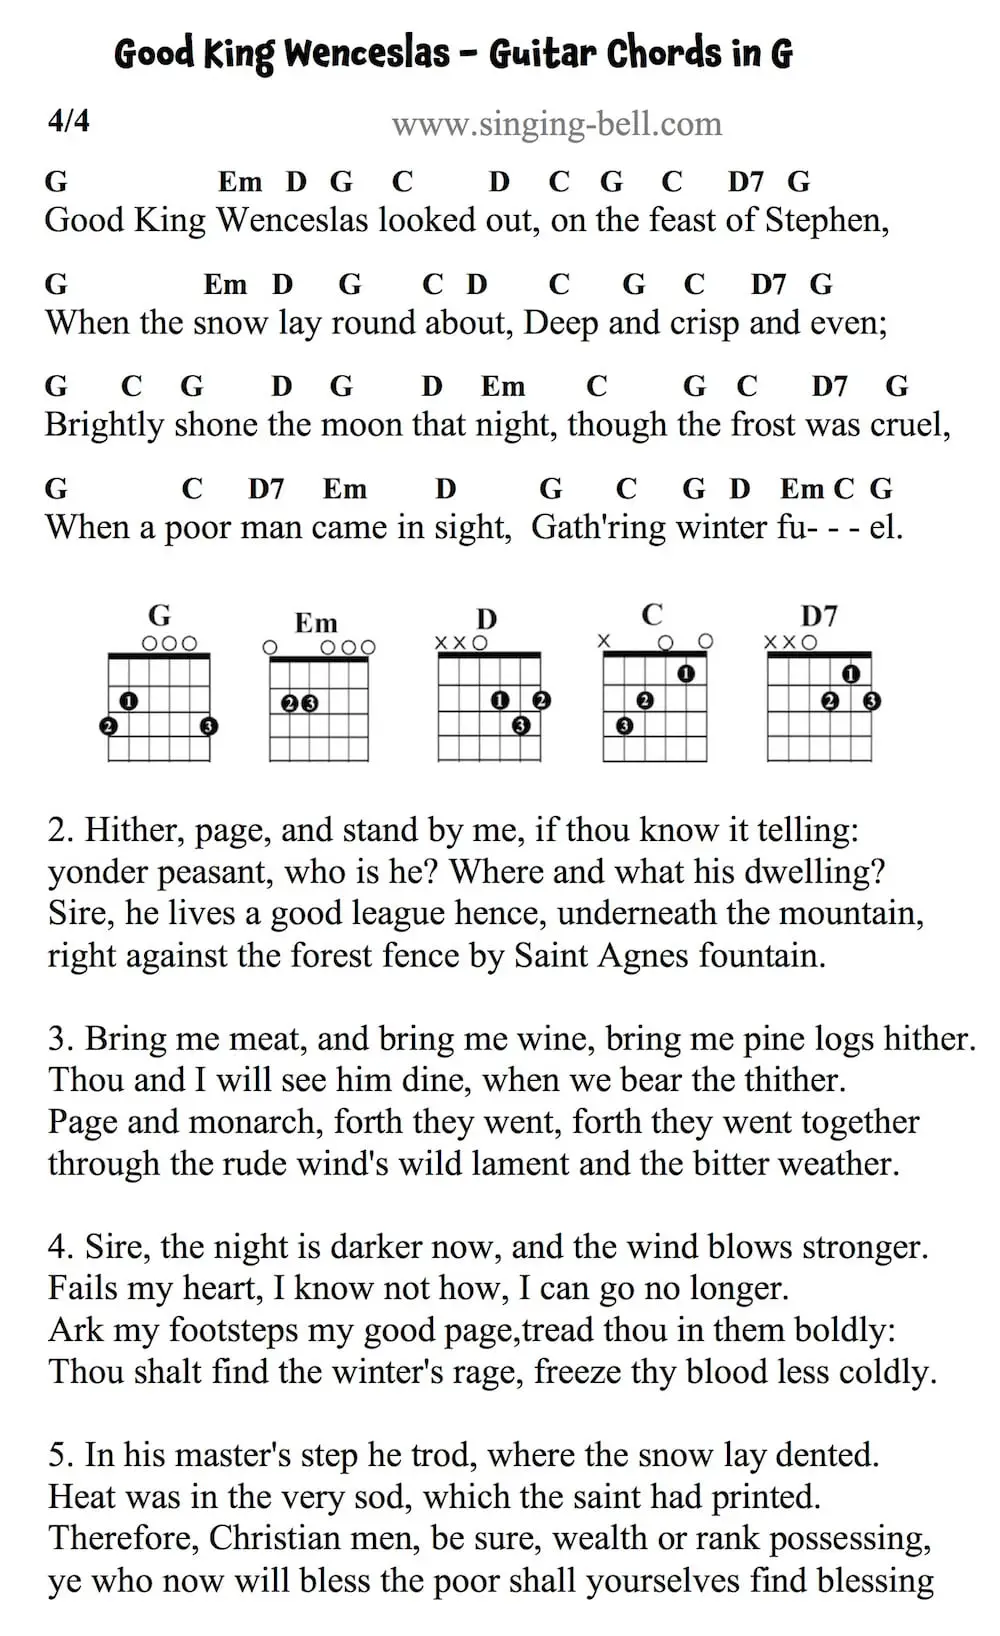 Good King Wenceslas easy Guitar Chords and Tabs in the key of G.